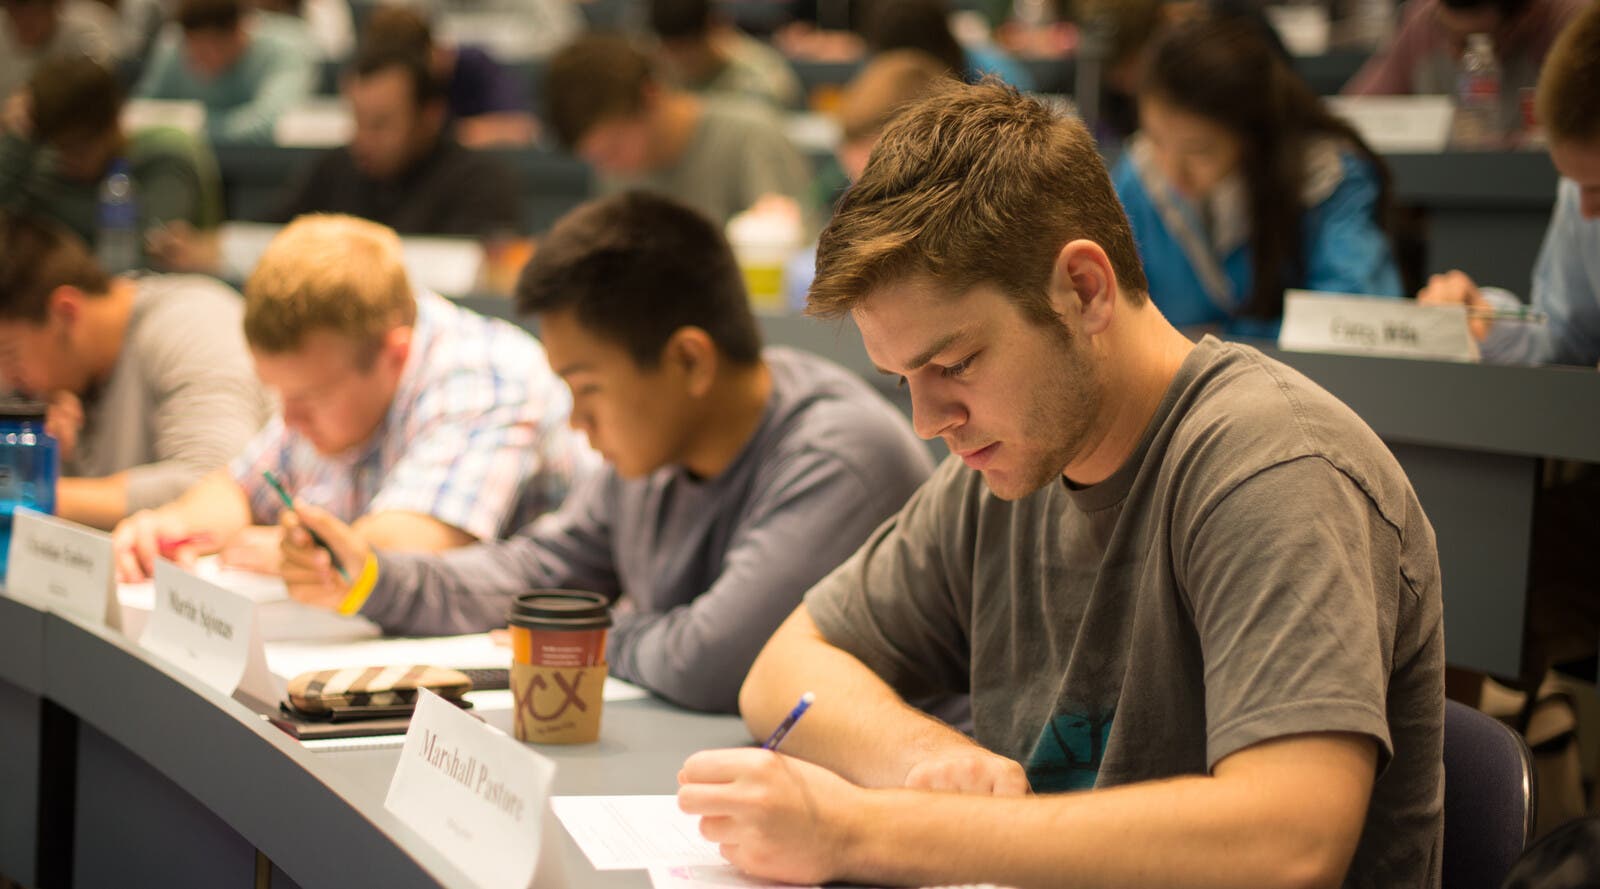 Students writing in lecture hall